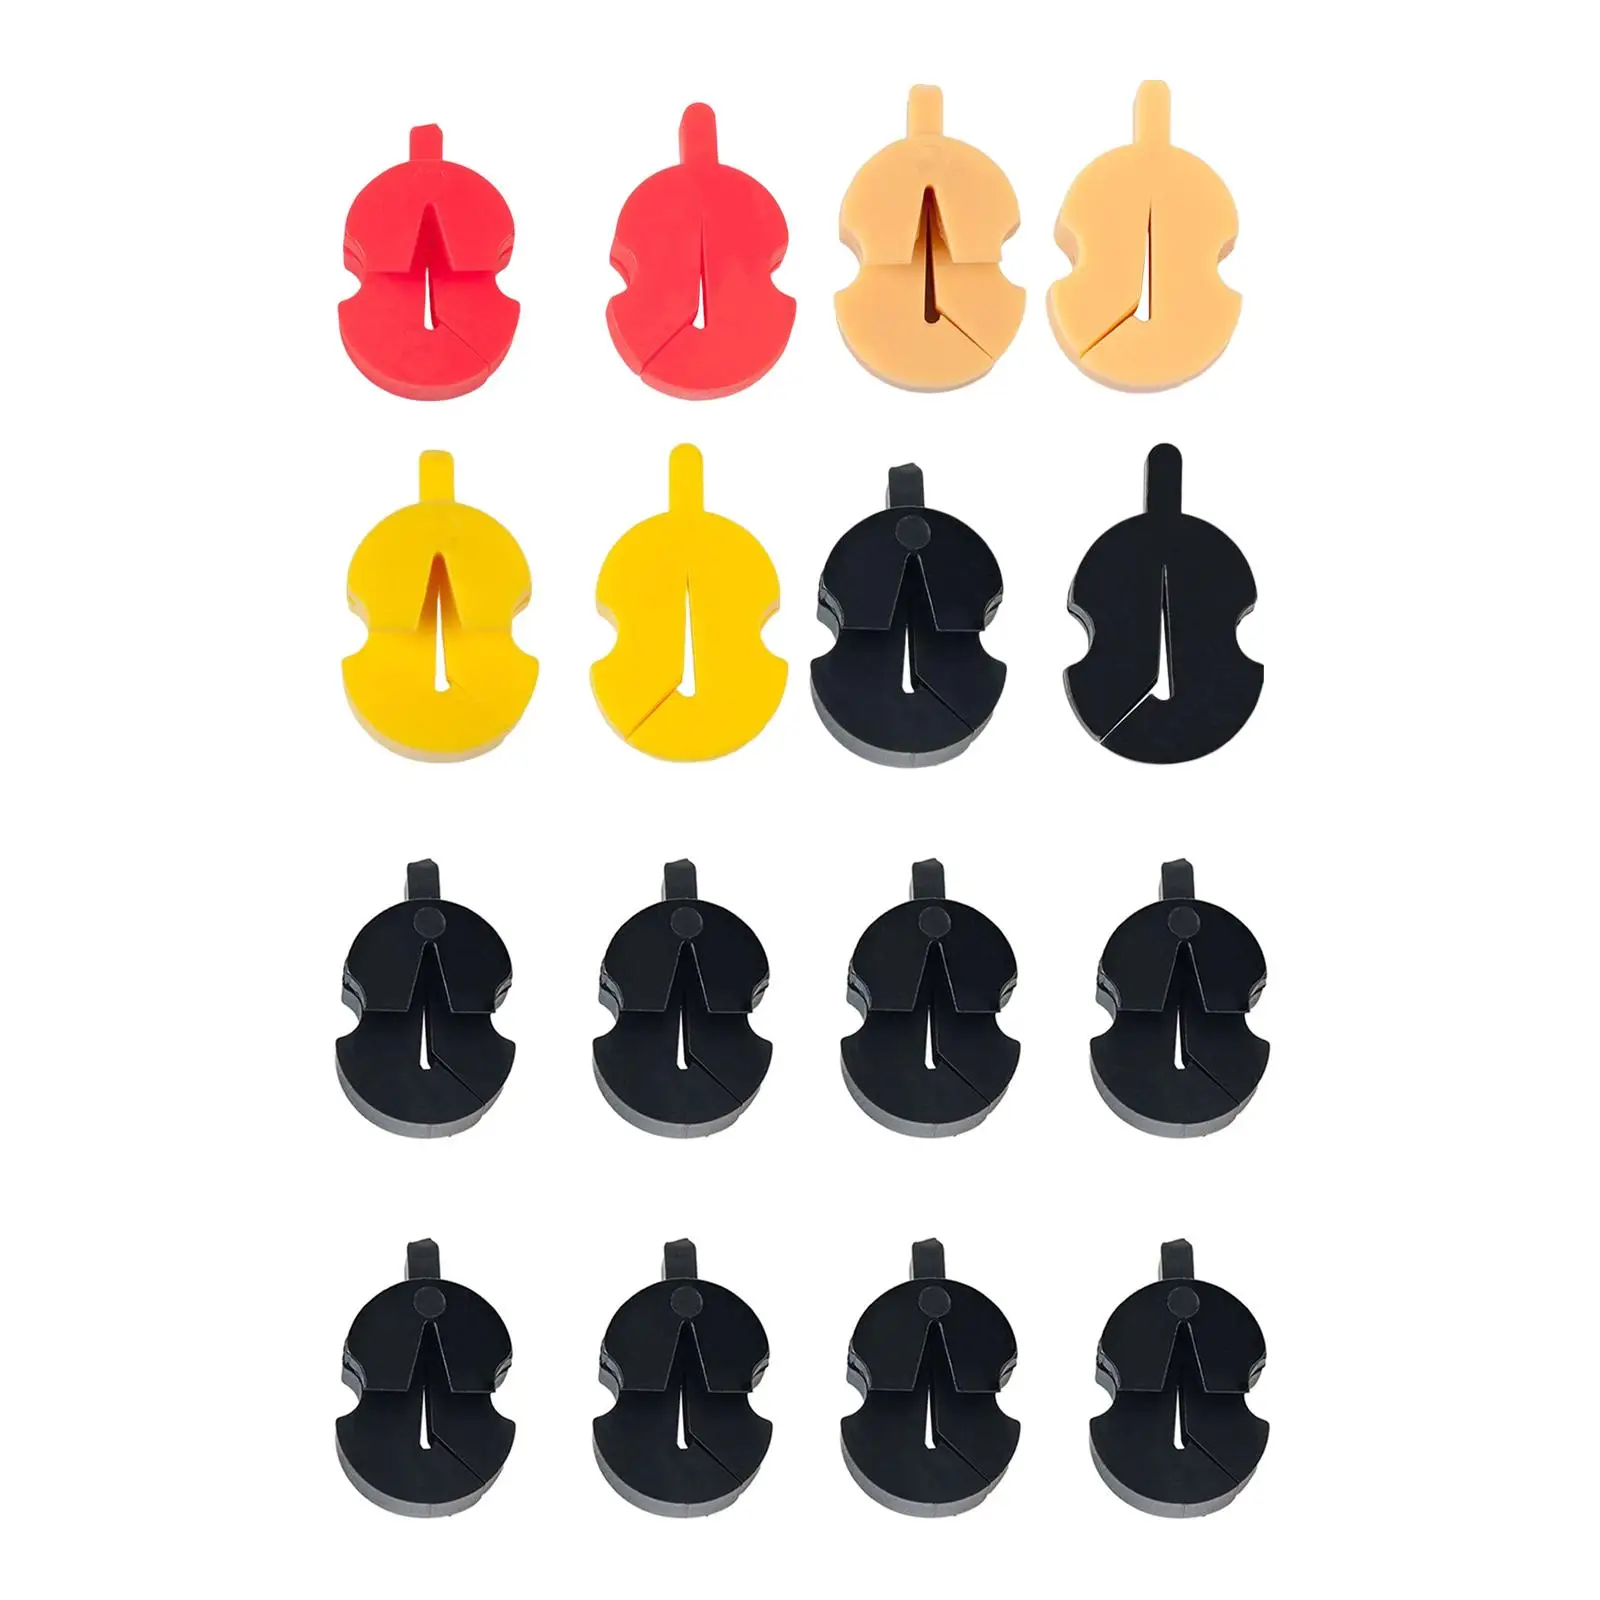 Rubber Violin Strings Dampener Silence Universal Mellowe Slience for Violin Accessories Beginner Gift Replaces